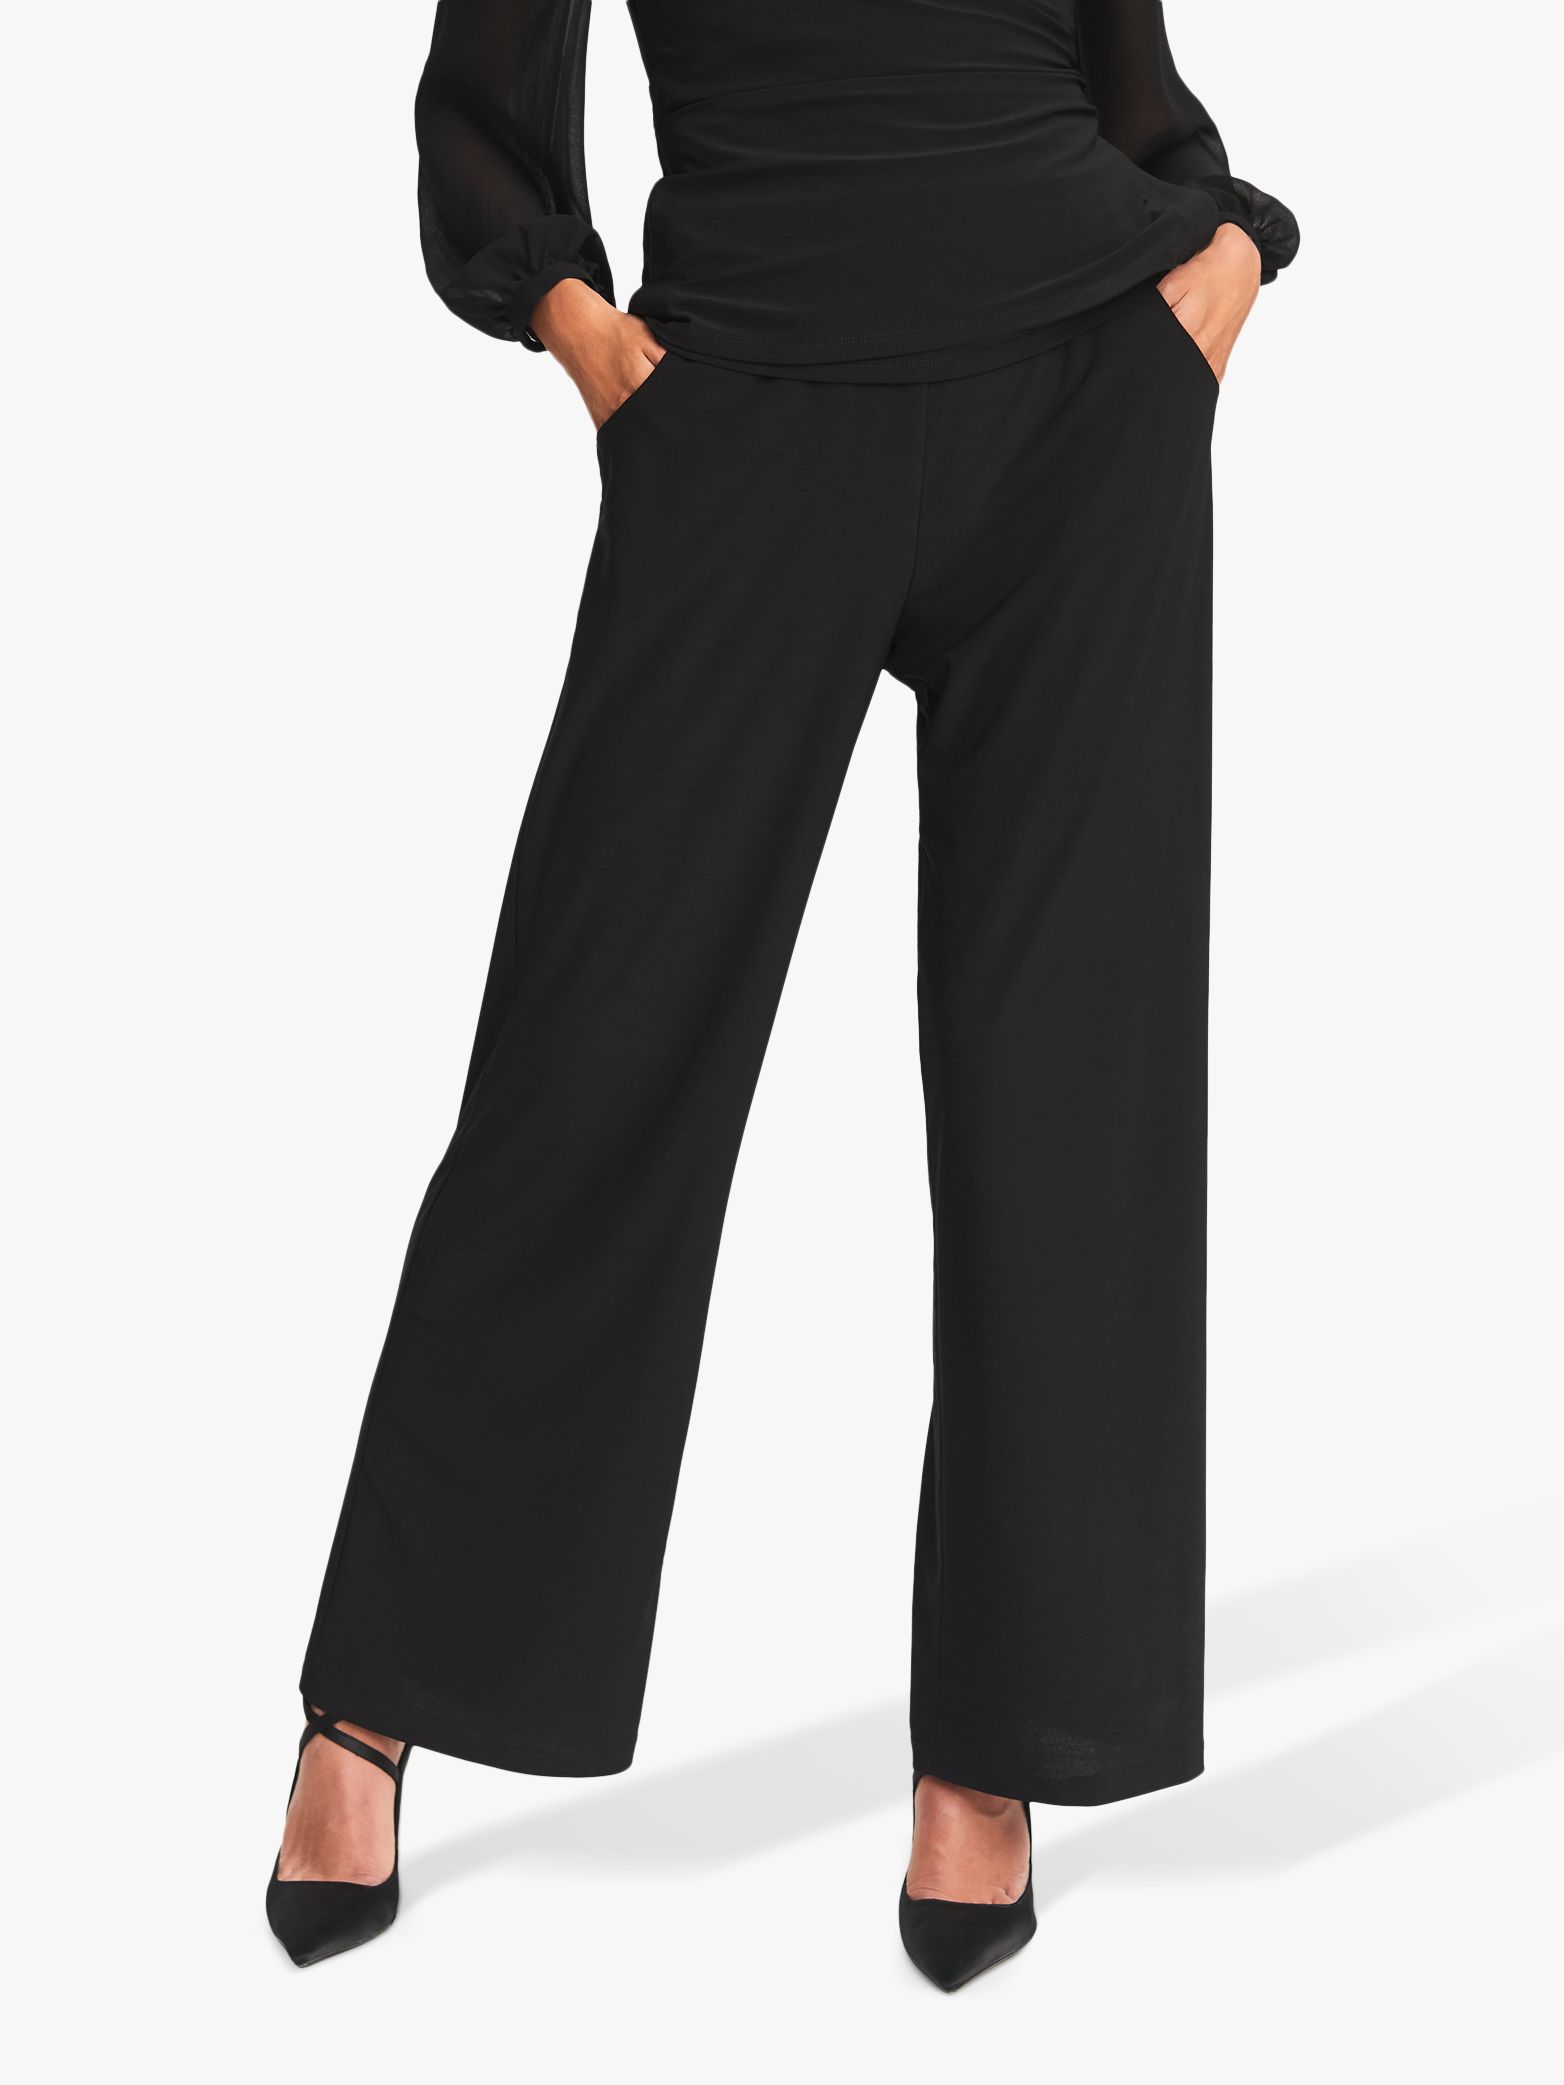 Phase Eight Corinne Trousers, Black